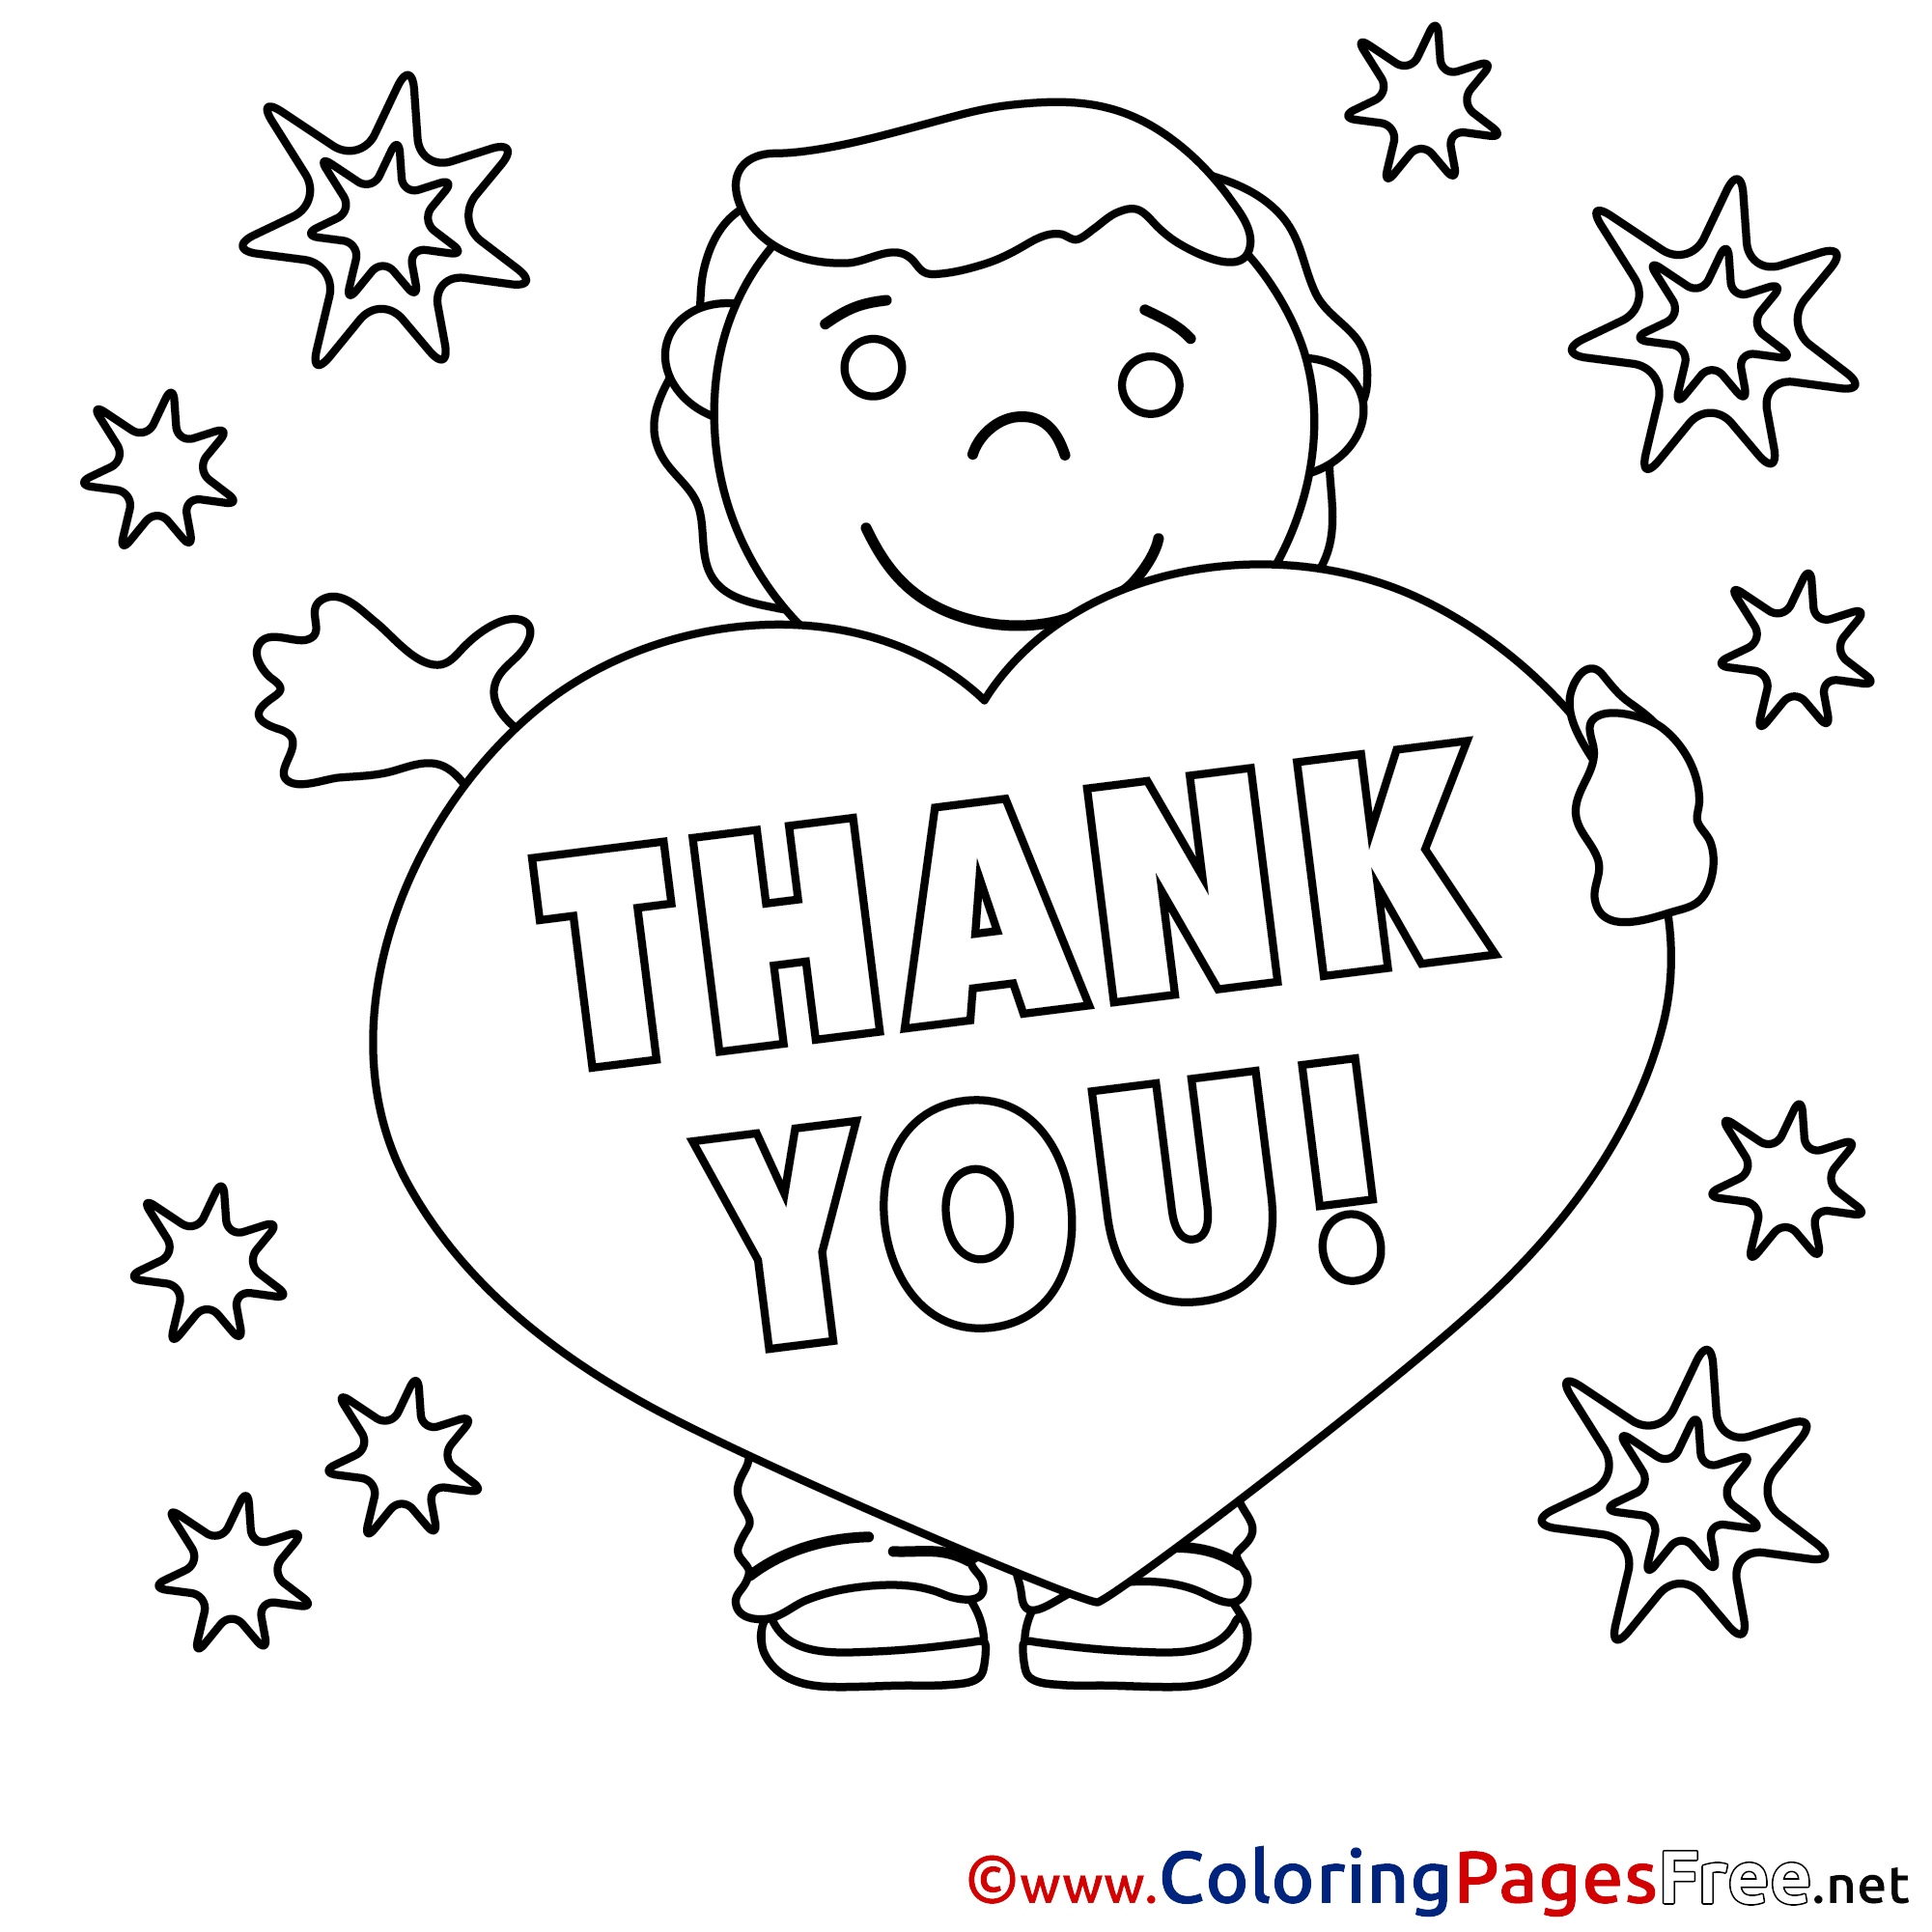 Thank You Coloring Pages Free at GetDrawings Free download